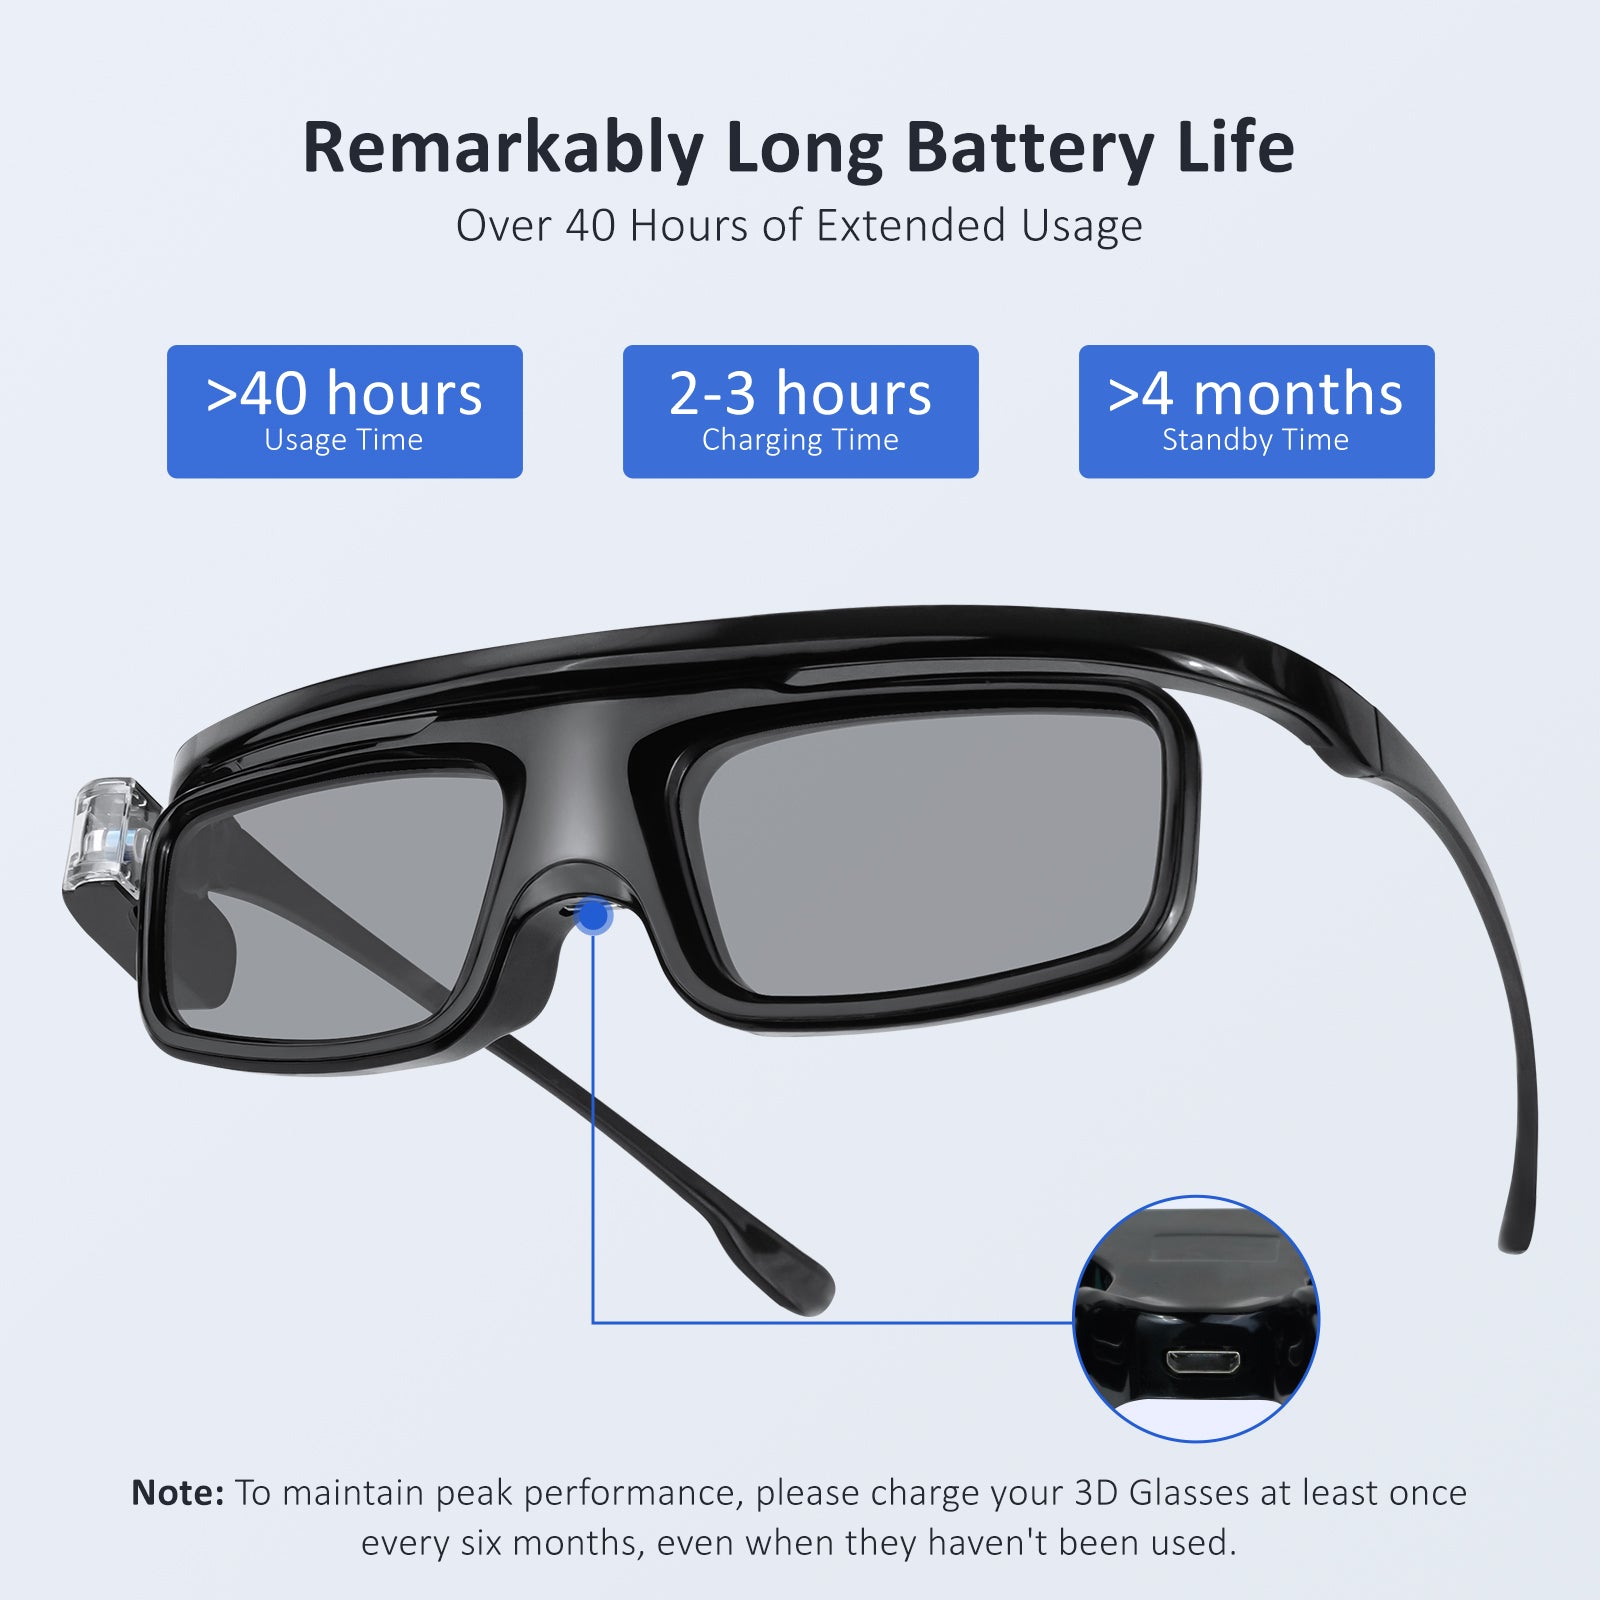 Display the front profile and bottom USB charging port of the 3D glasses